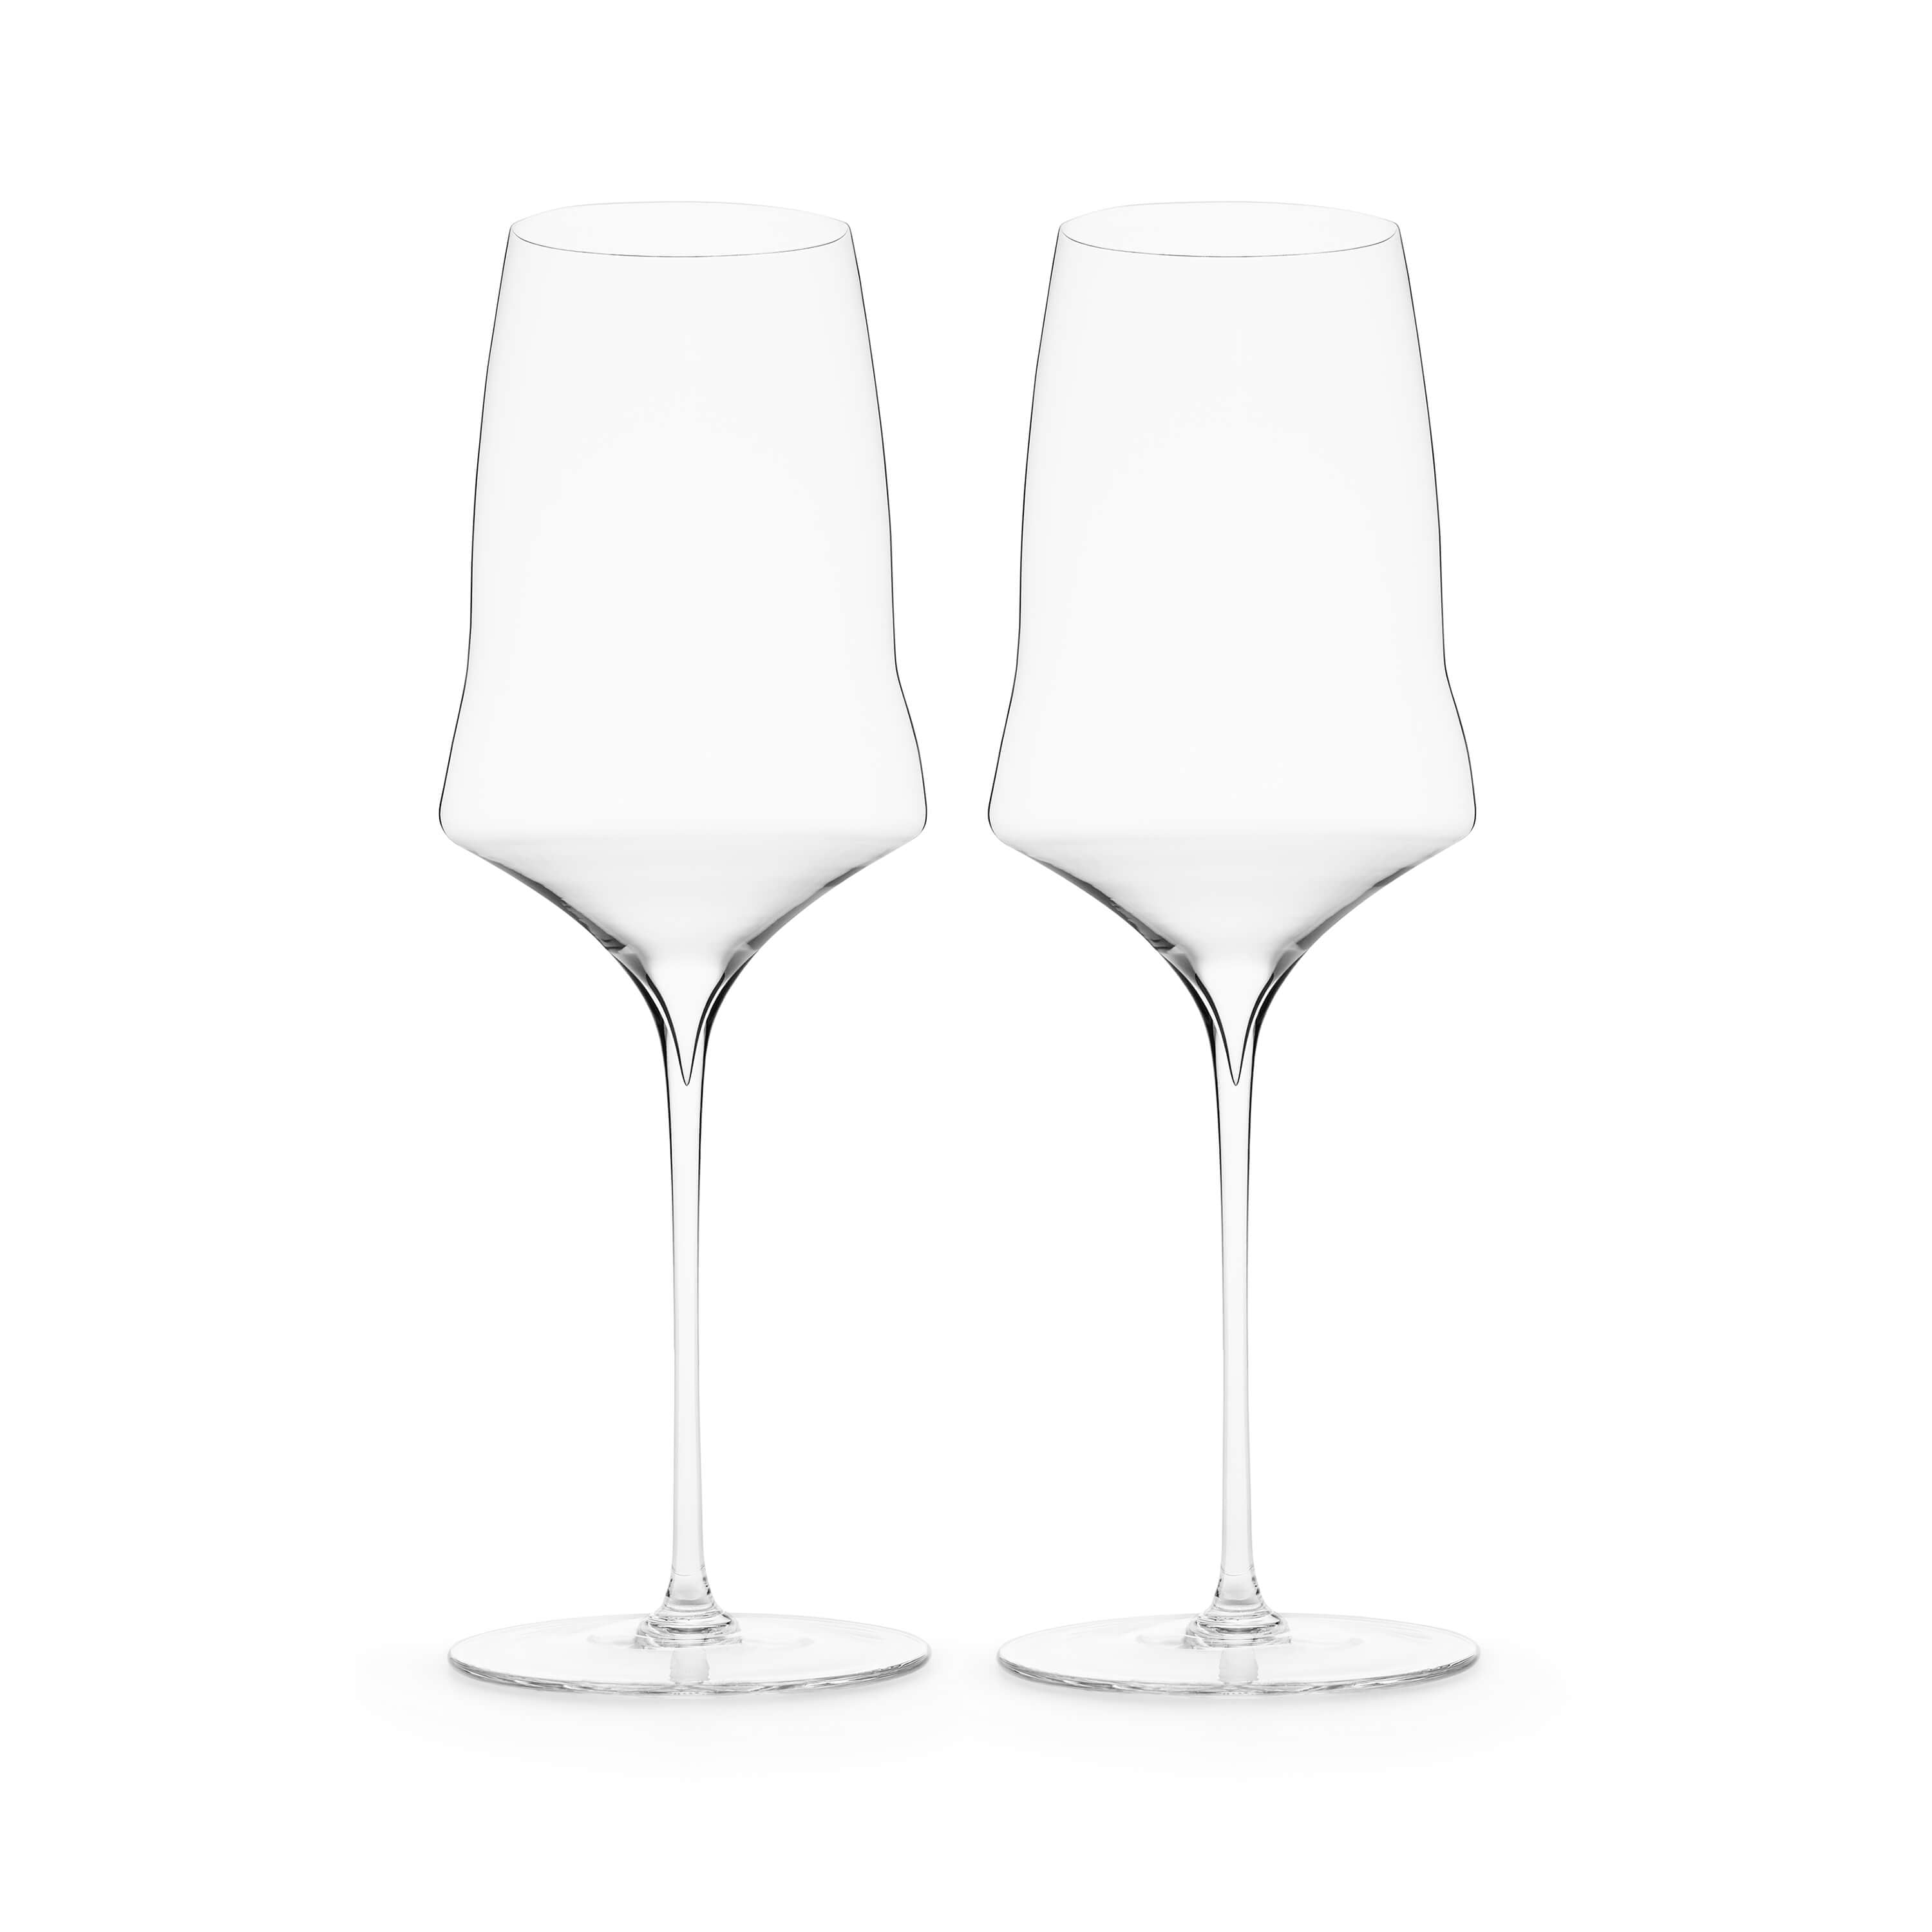 Set of two white wine glasses by Josephinenhütte